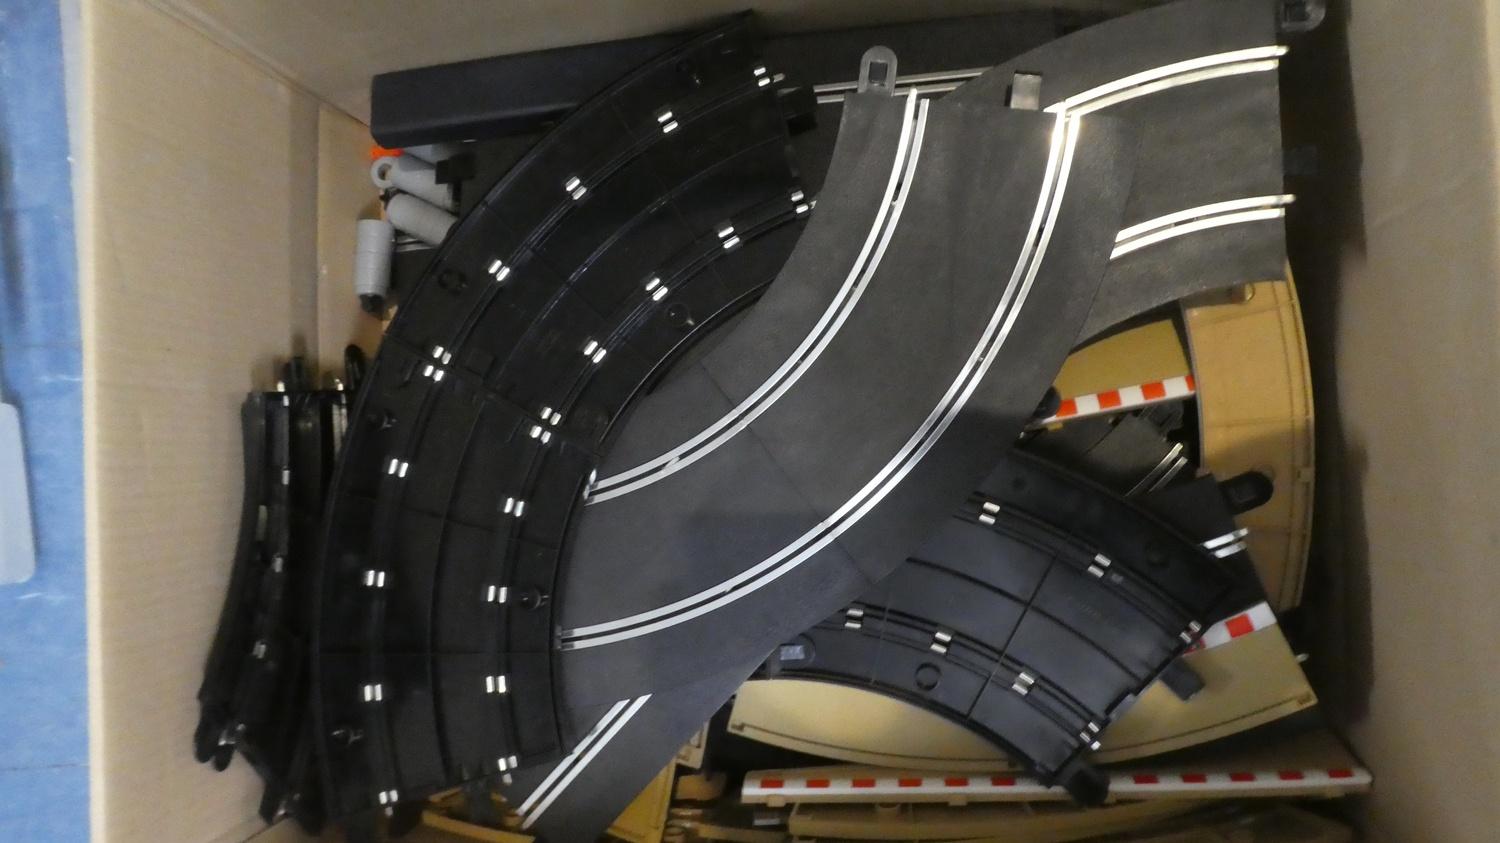 A Collection of Scalextric Digital to Include Two Maserati Cars, Controllers, Track, Digital Lap - Image 3 of 3